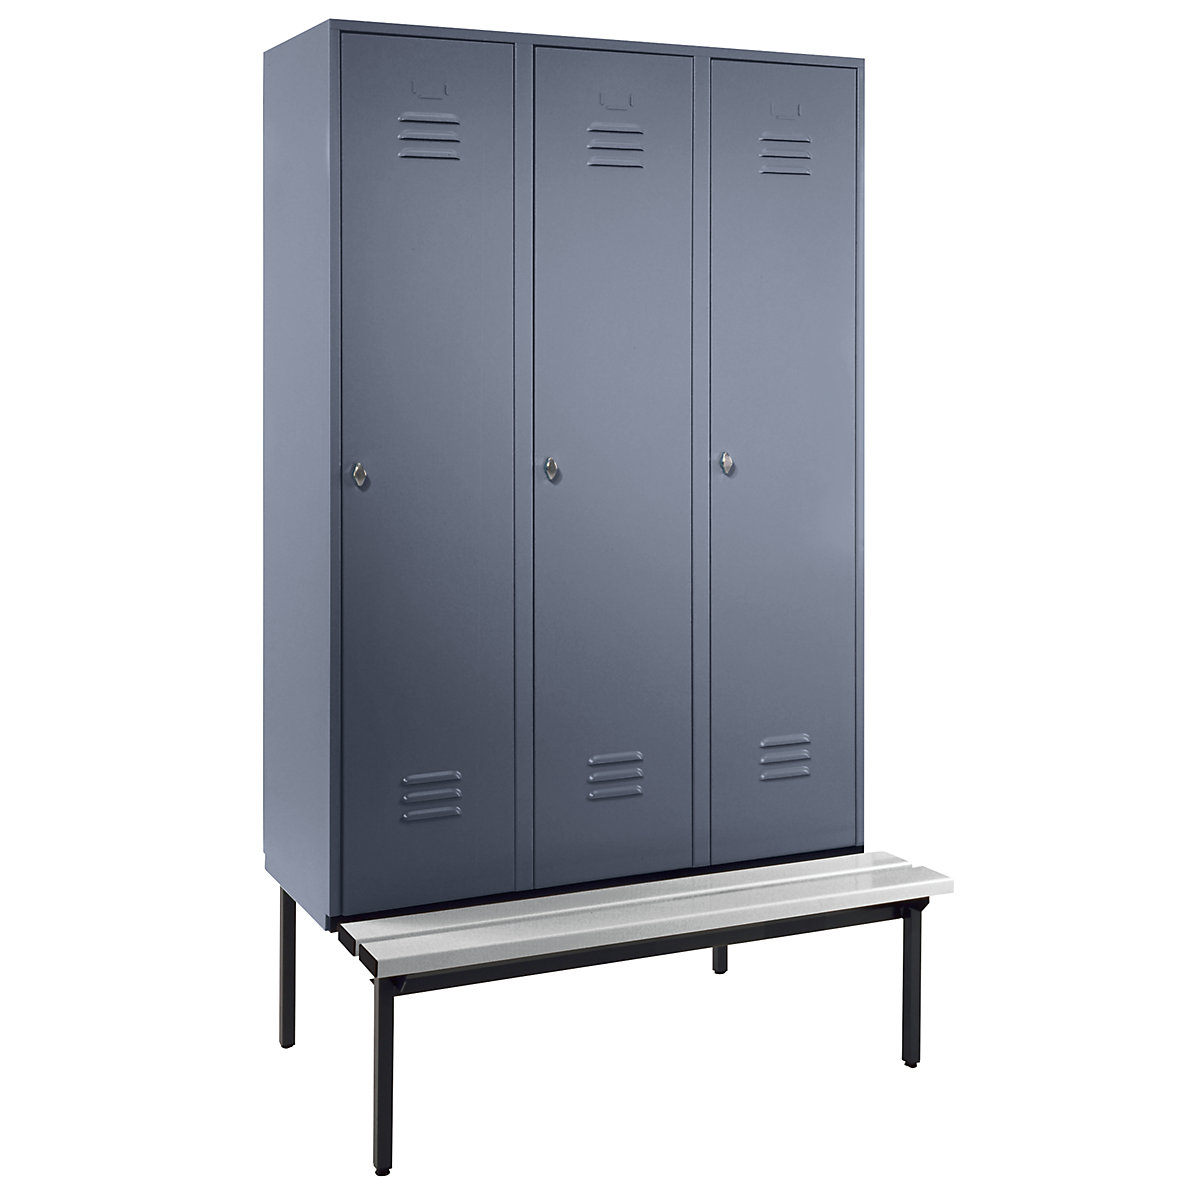 Clothes locker with bench mounted underneath – Wolf